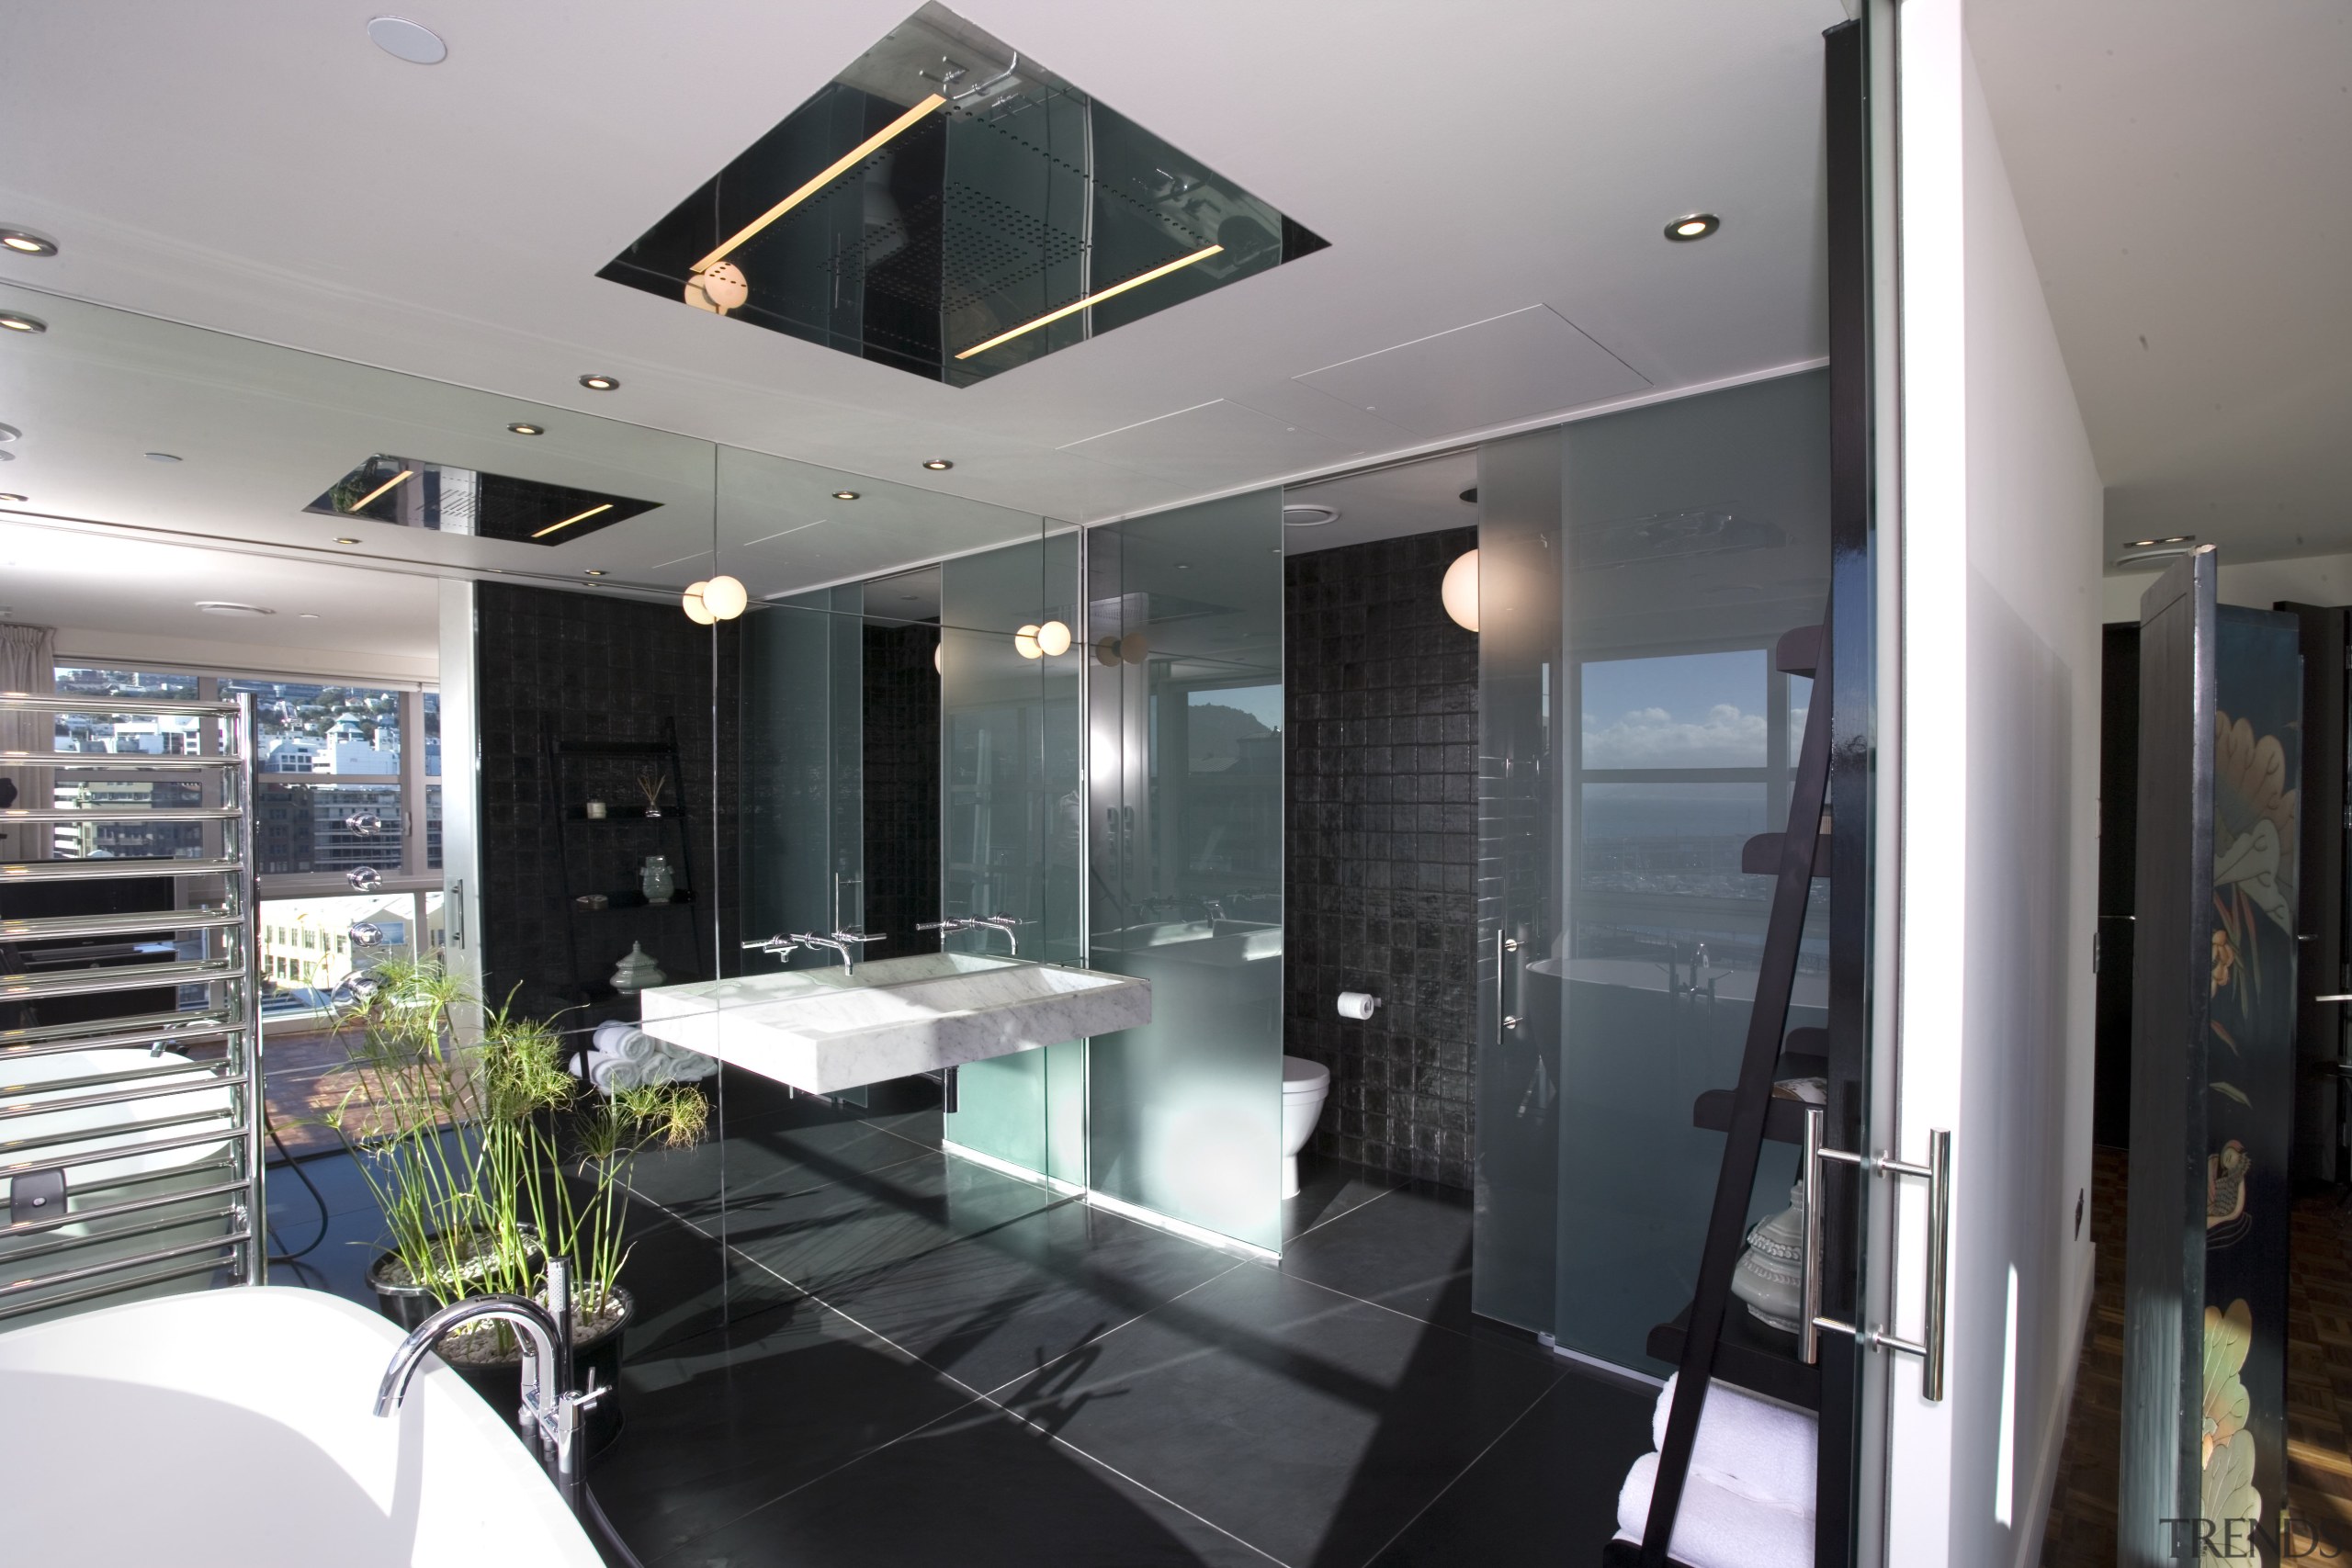 The bathroom features a fully mirrored wall, rain glass, interior design, window, gray, black